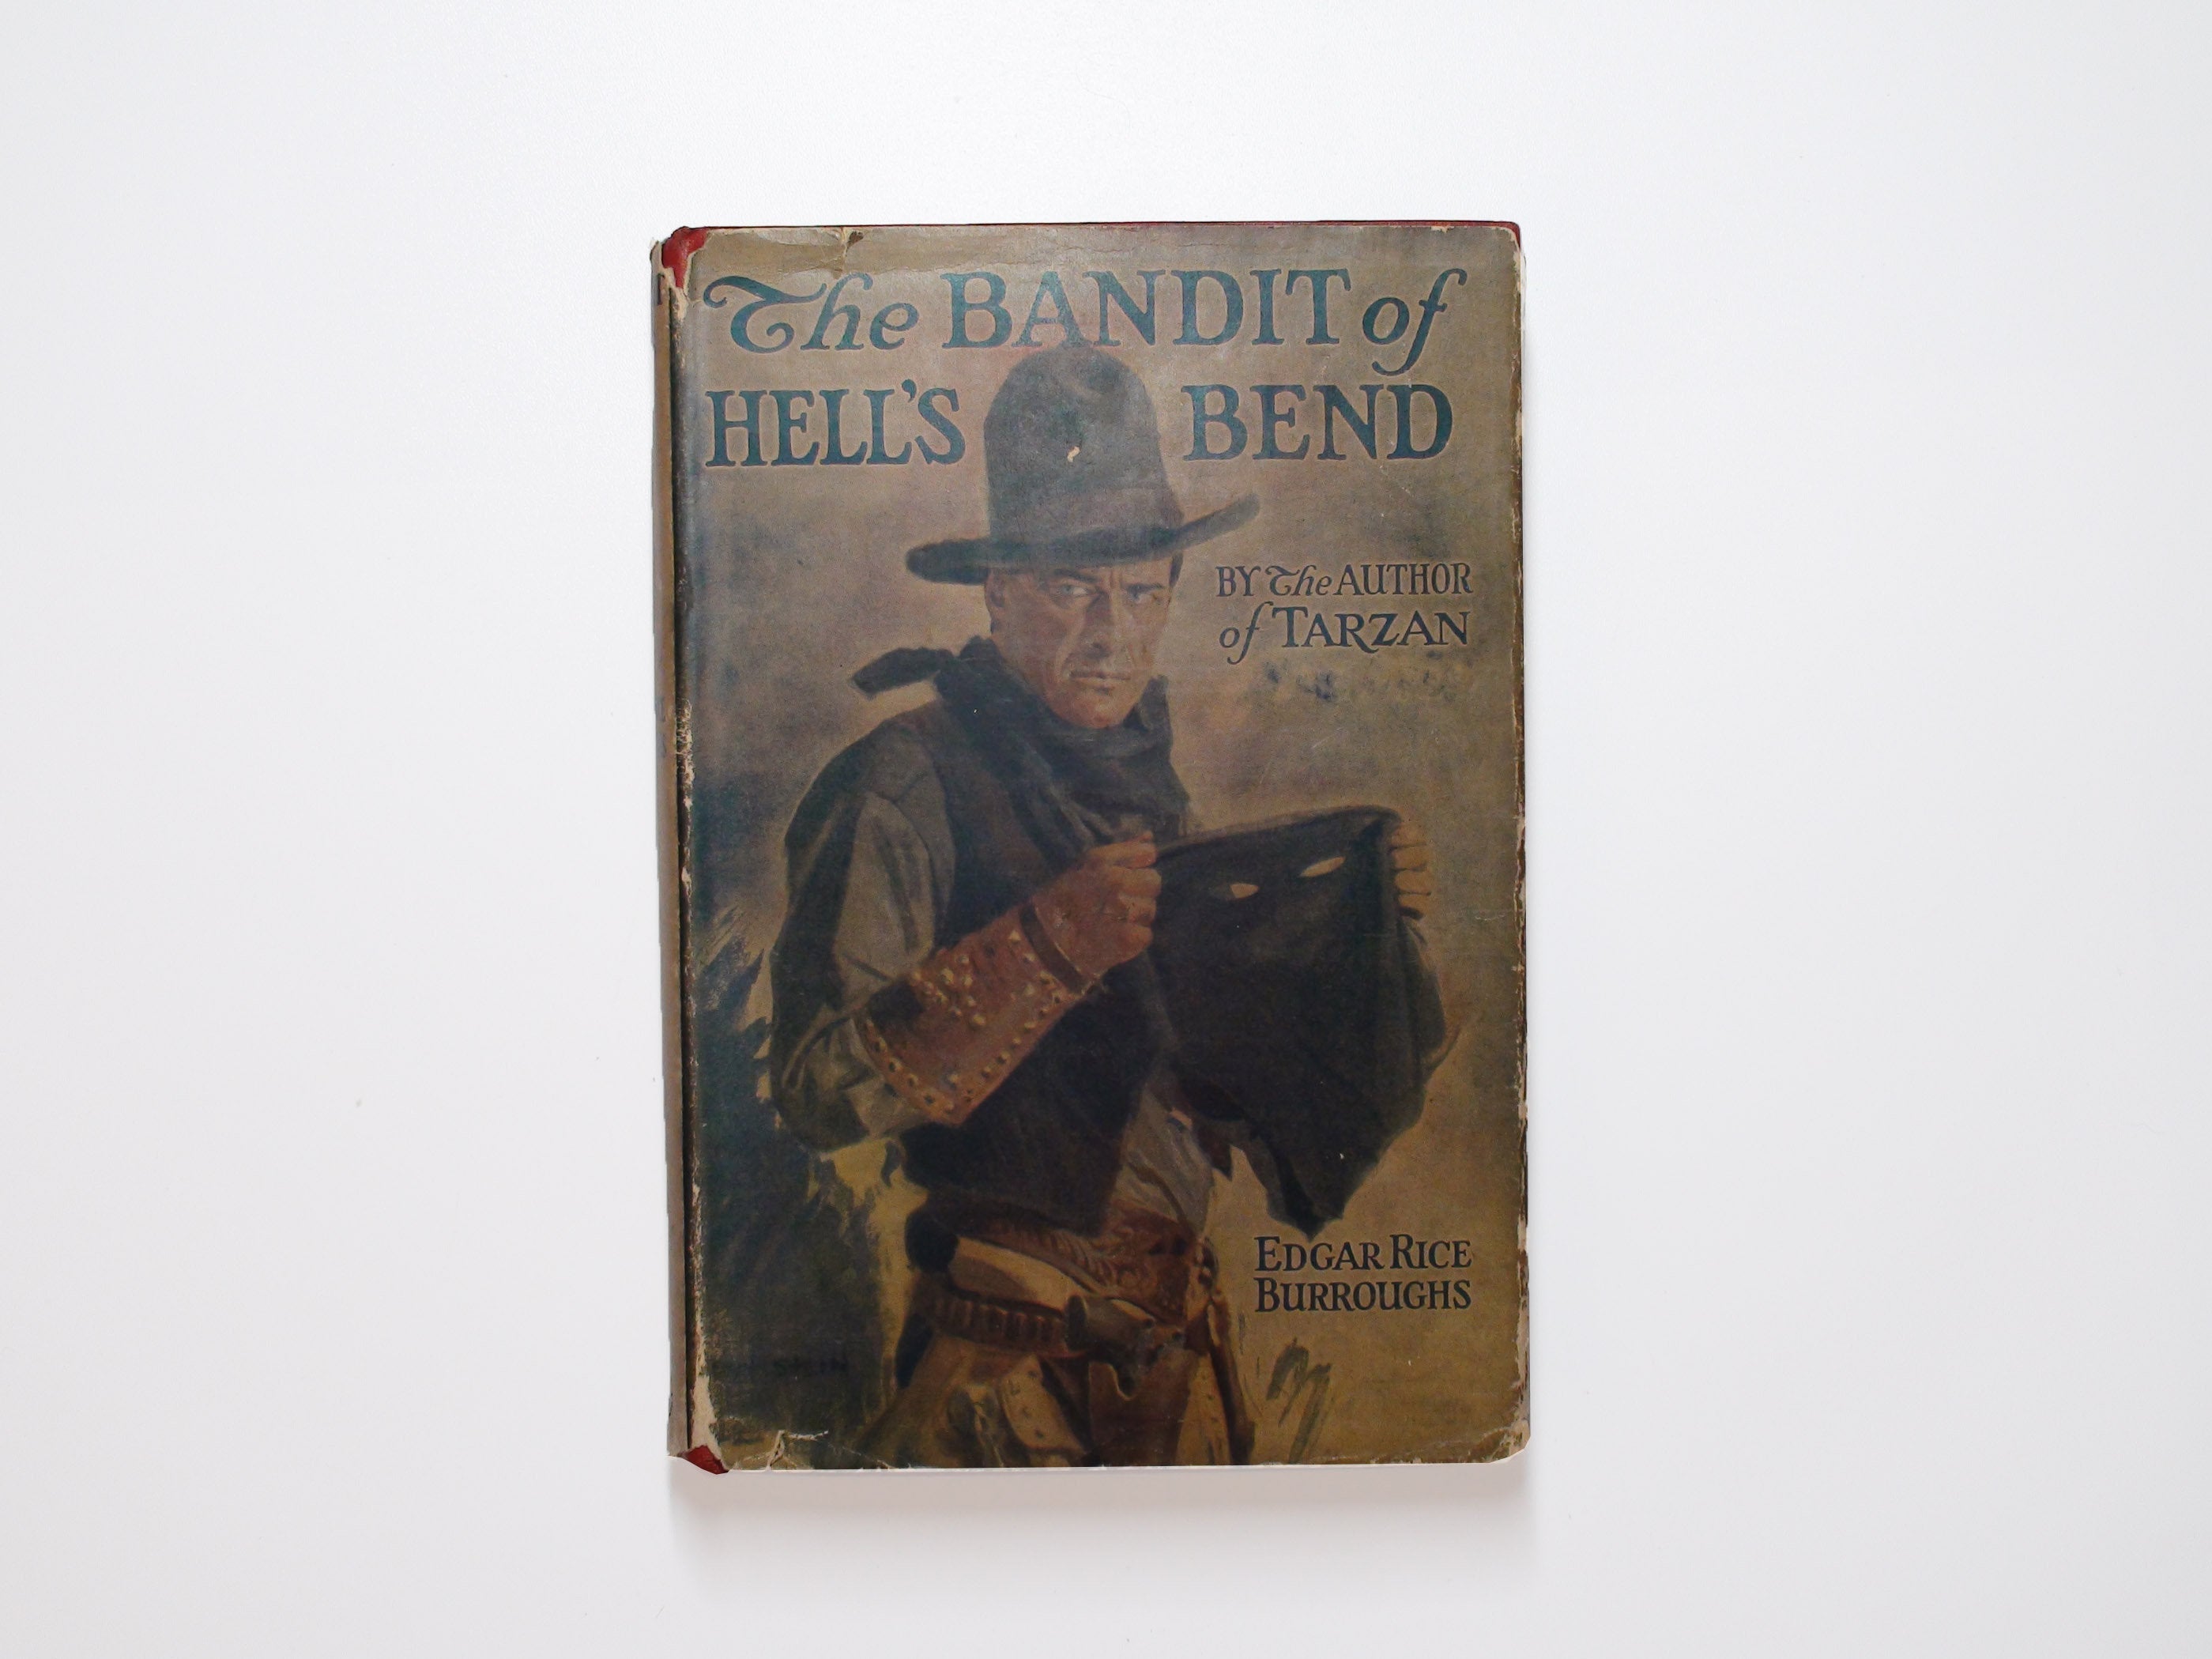 The Bandit of Hell's Bend, Edgar Rice Burroughs, w DJ, Grosset and Dunlap, 1925